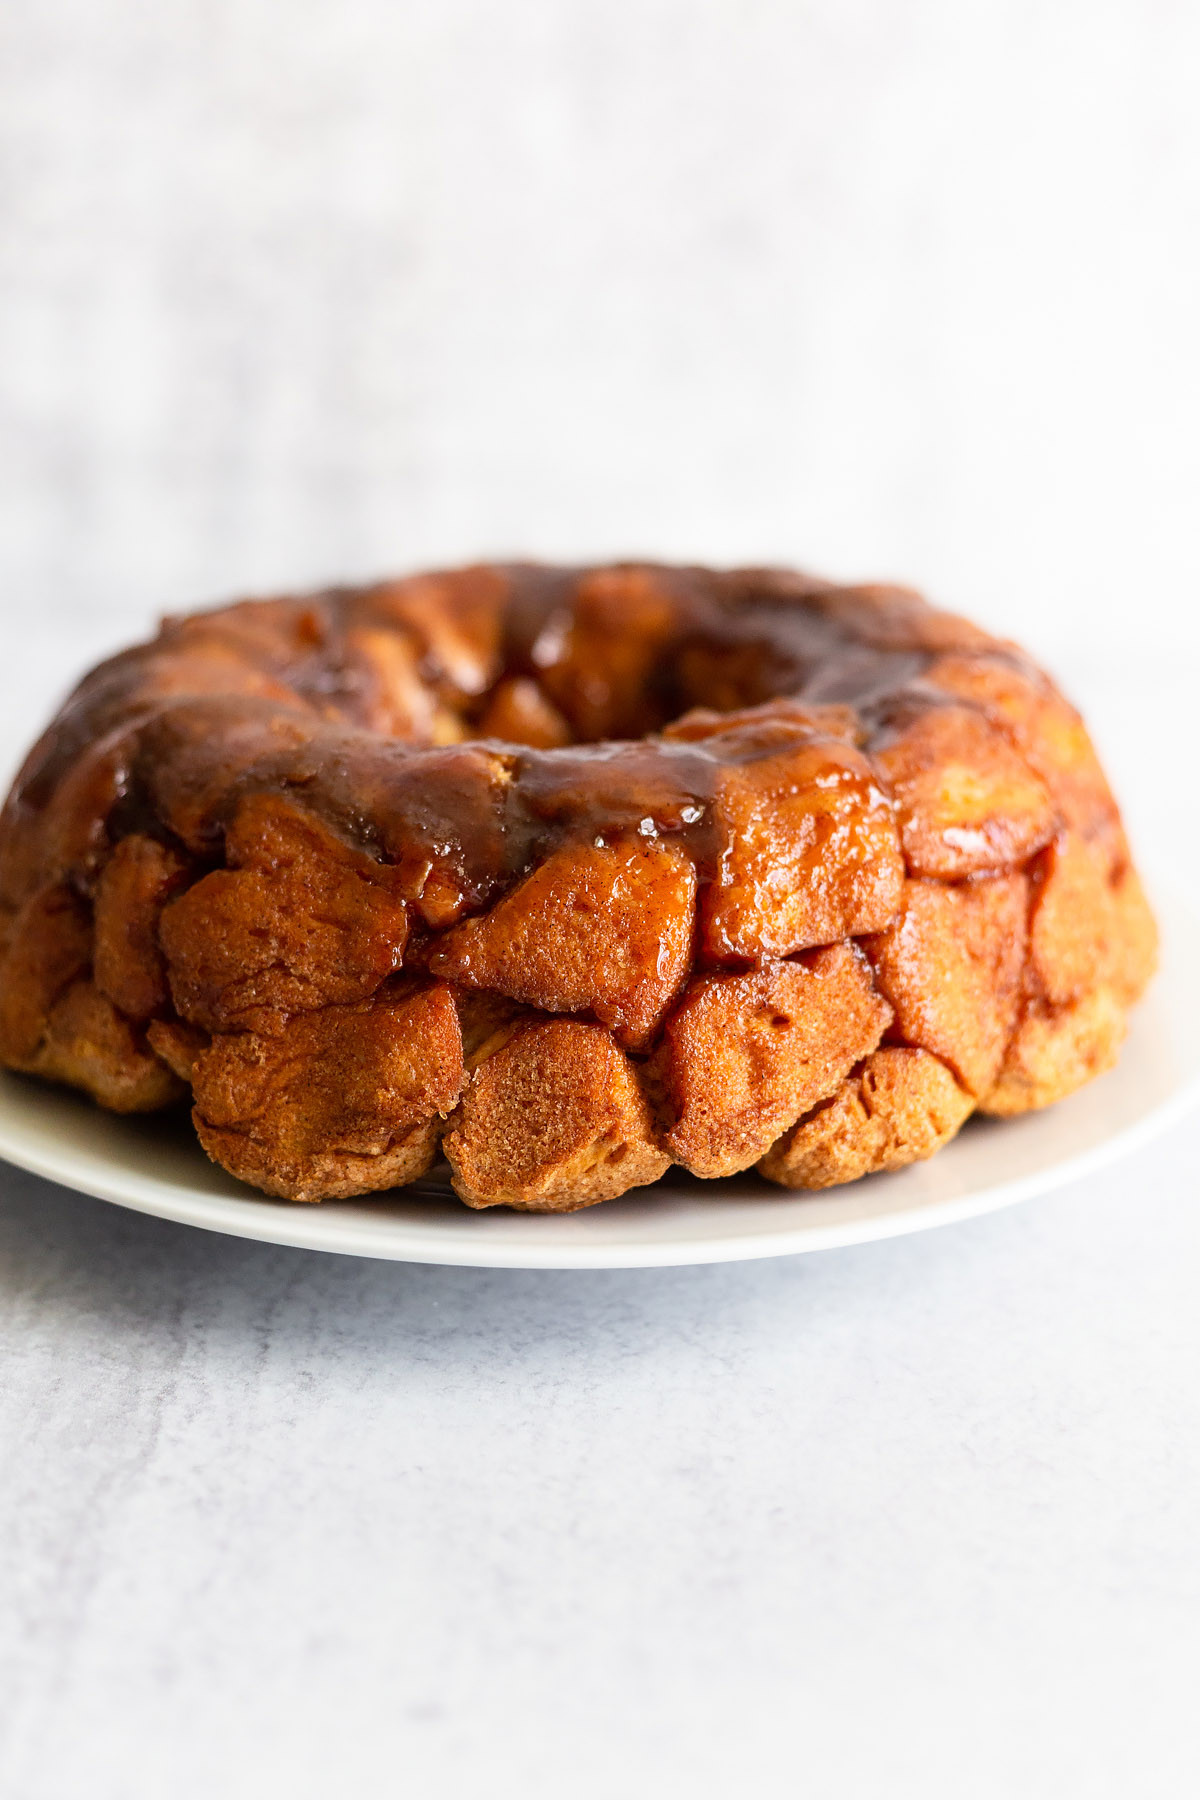 Easy Monkey Bread Recipe with 1 Can Of Biscuits Elegant Monkey Bread with 1 Can Biscuits Make Easy Monkey